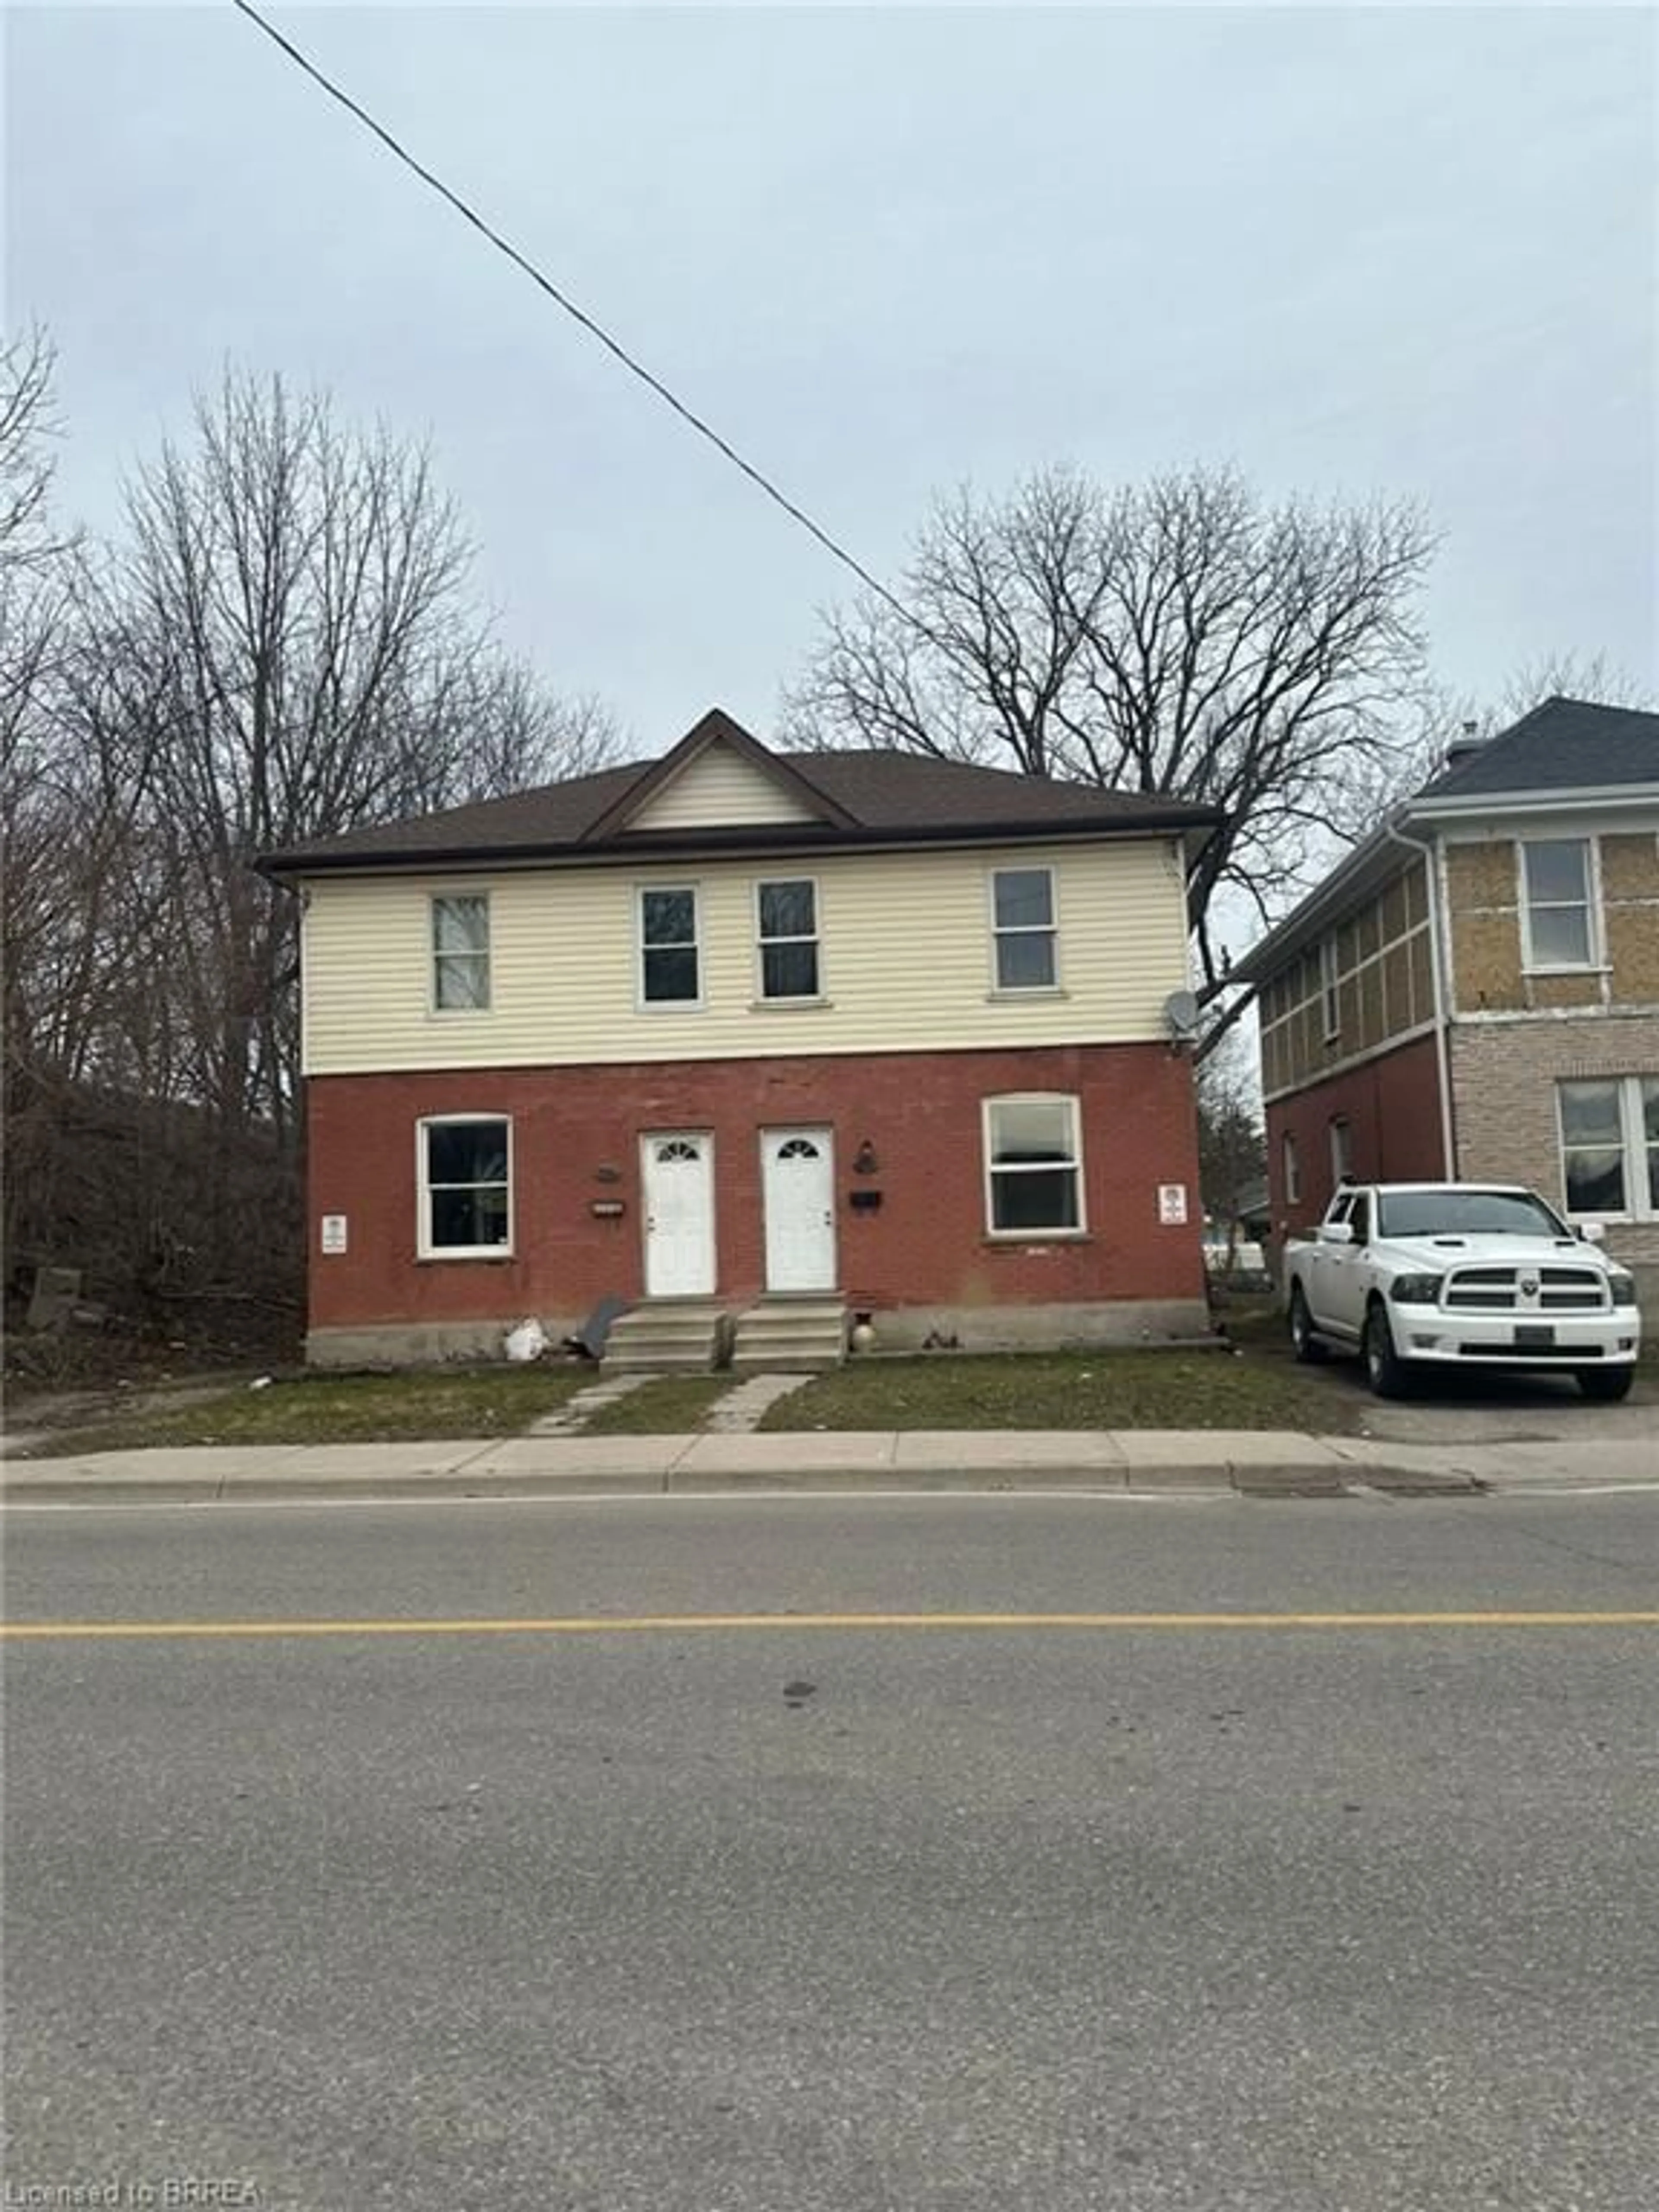 Frontside or backside of a home for 283 Murray St, Brantford Ontario N3S 5S7